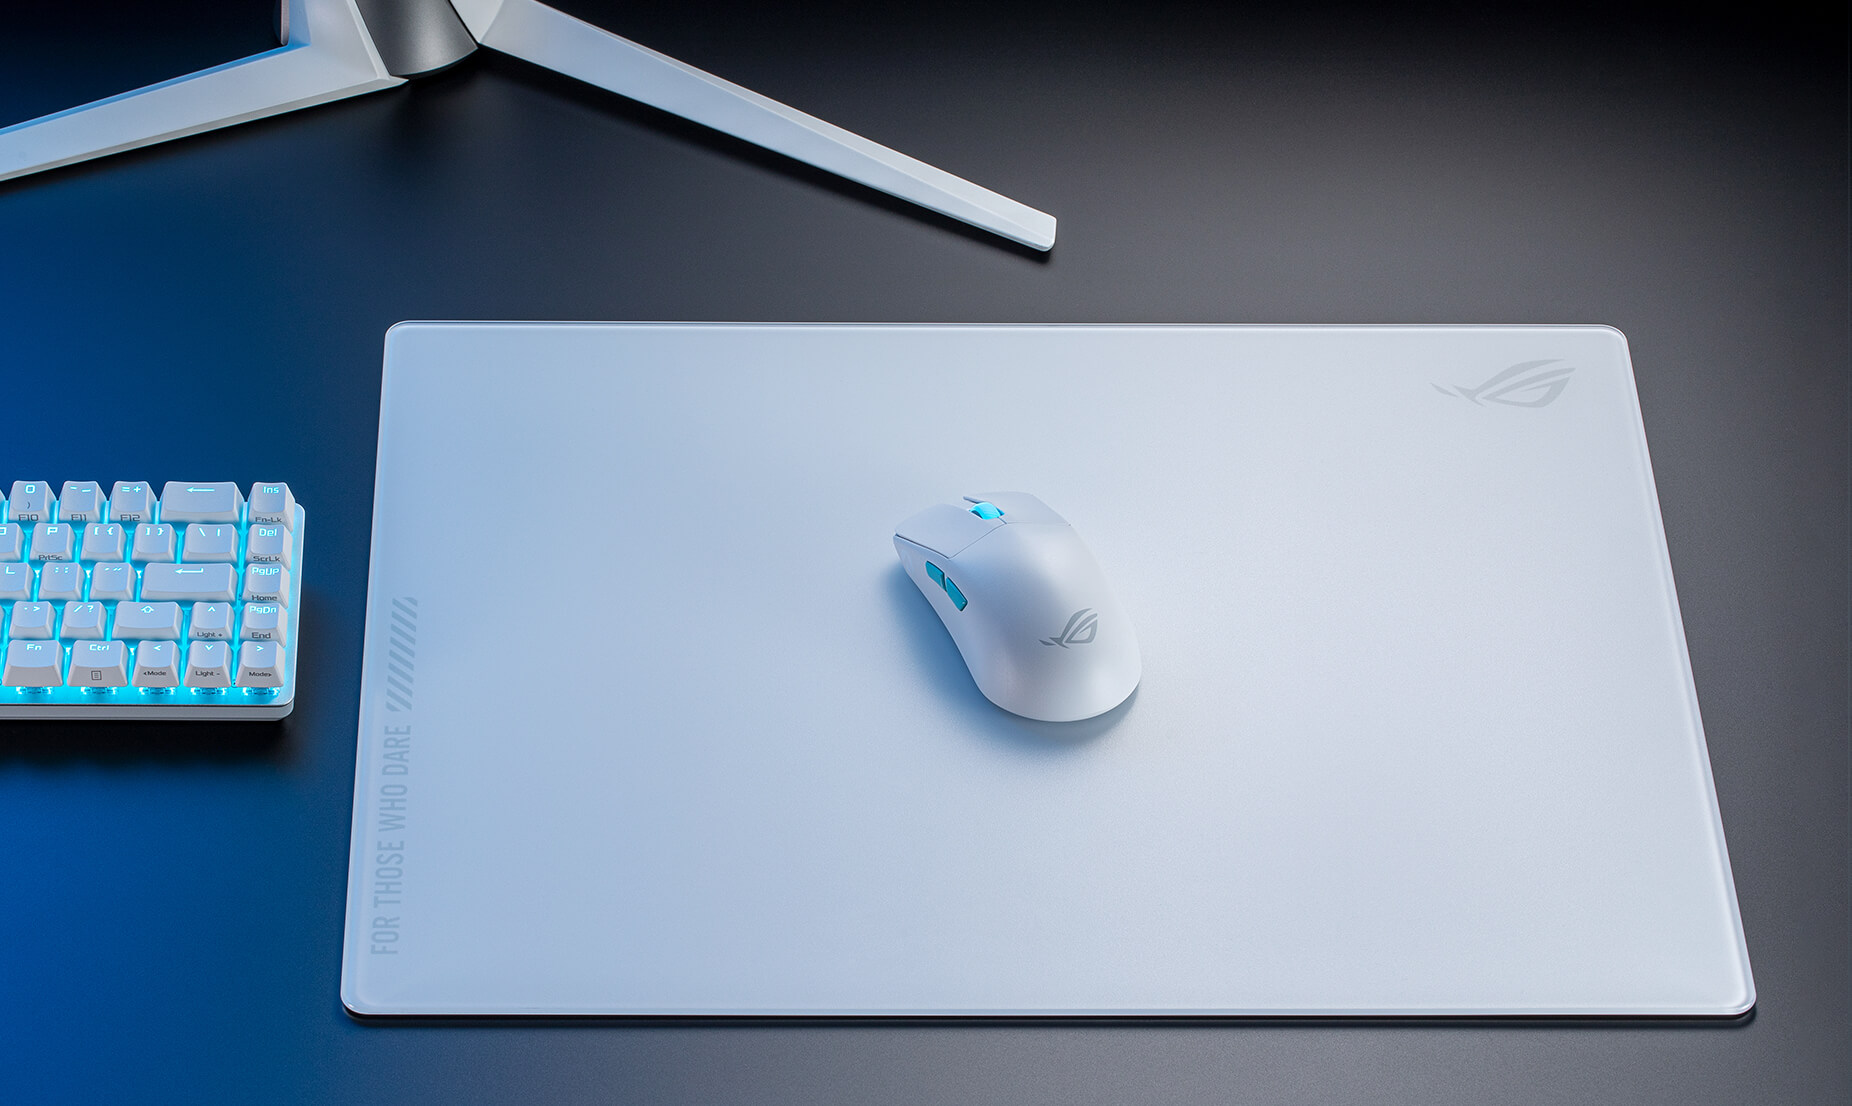 The moonlight white ROG Moonstone Ace L mouse pad in a full set up with the moonlight white ROG Harpe Ace Aim Lab Edition